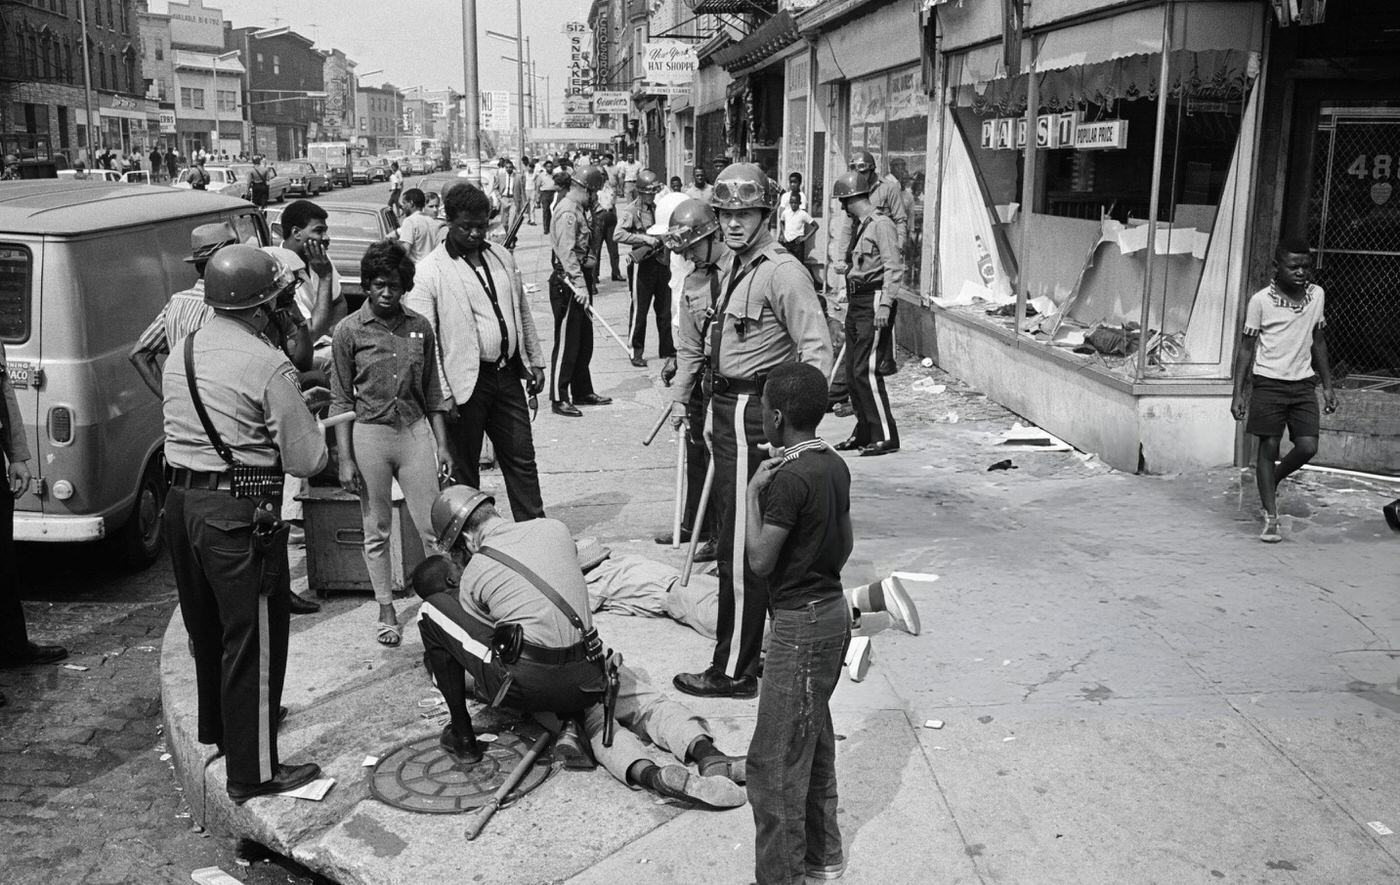 Police officers and National Guardsmen round up looters on a major thoroughfare following a second night of rioting in Newark, New Jersey, 1960s.